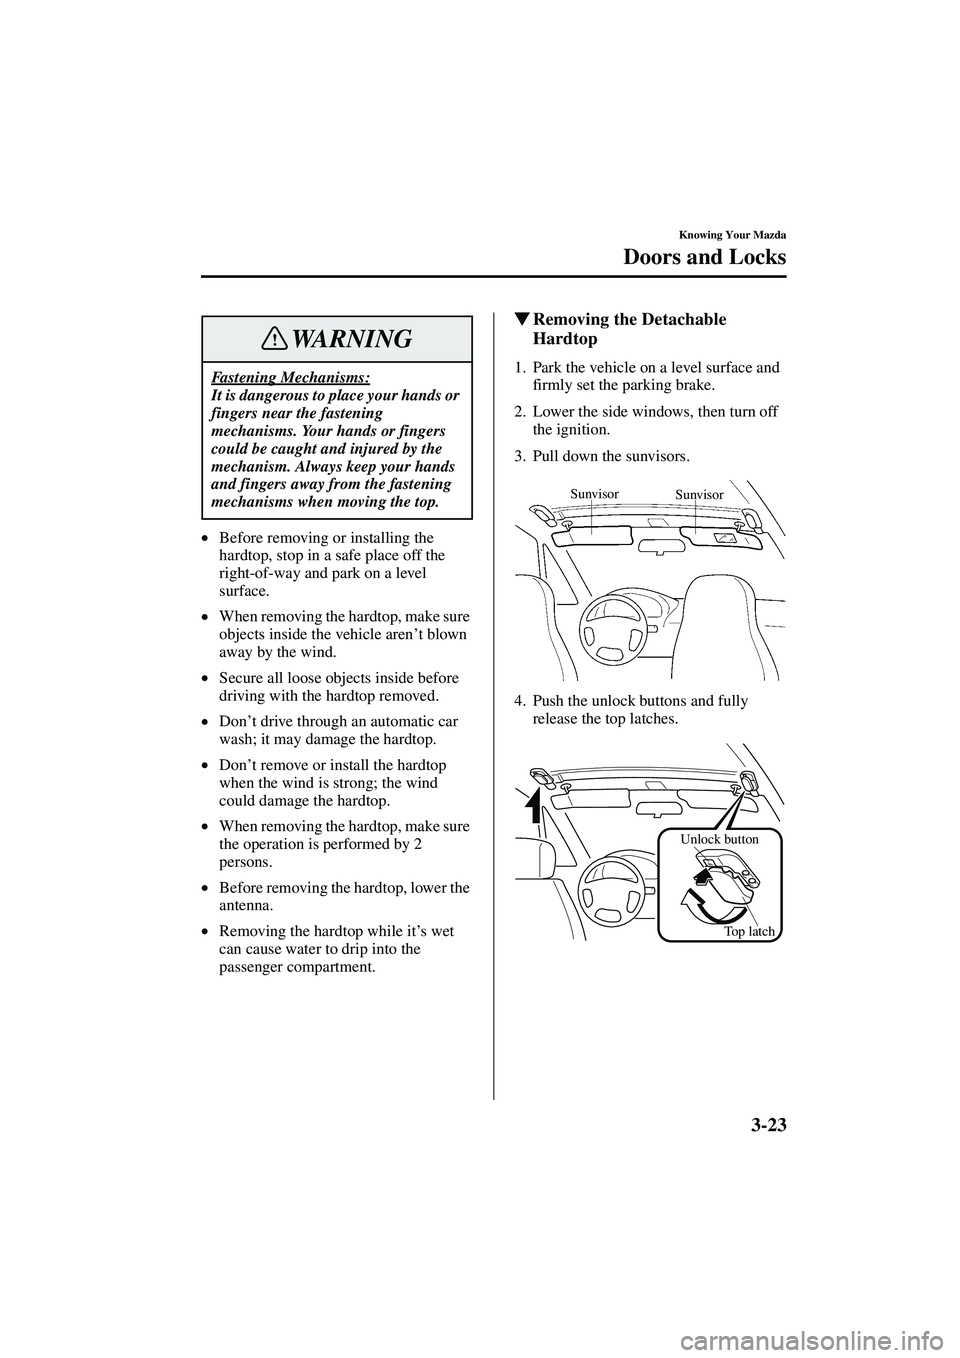 MAZDA MODEL MX-5 MIATA 2003  Owners Manual 3-23
Knowing Your Mazda
Doors and Locks
Form No. 8R09-EA-02G
•Before removing or installing the 
hardtop, stop in a safe place off the 
right-of-way and park on a level 
surface.
• When removing t